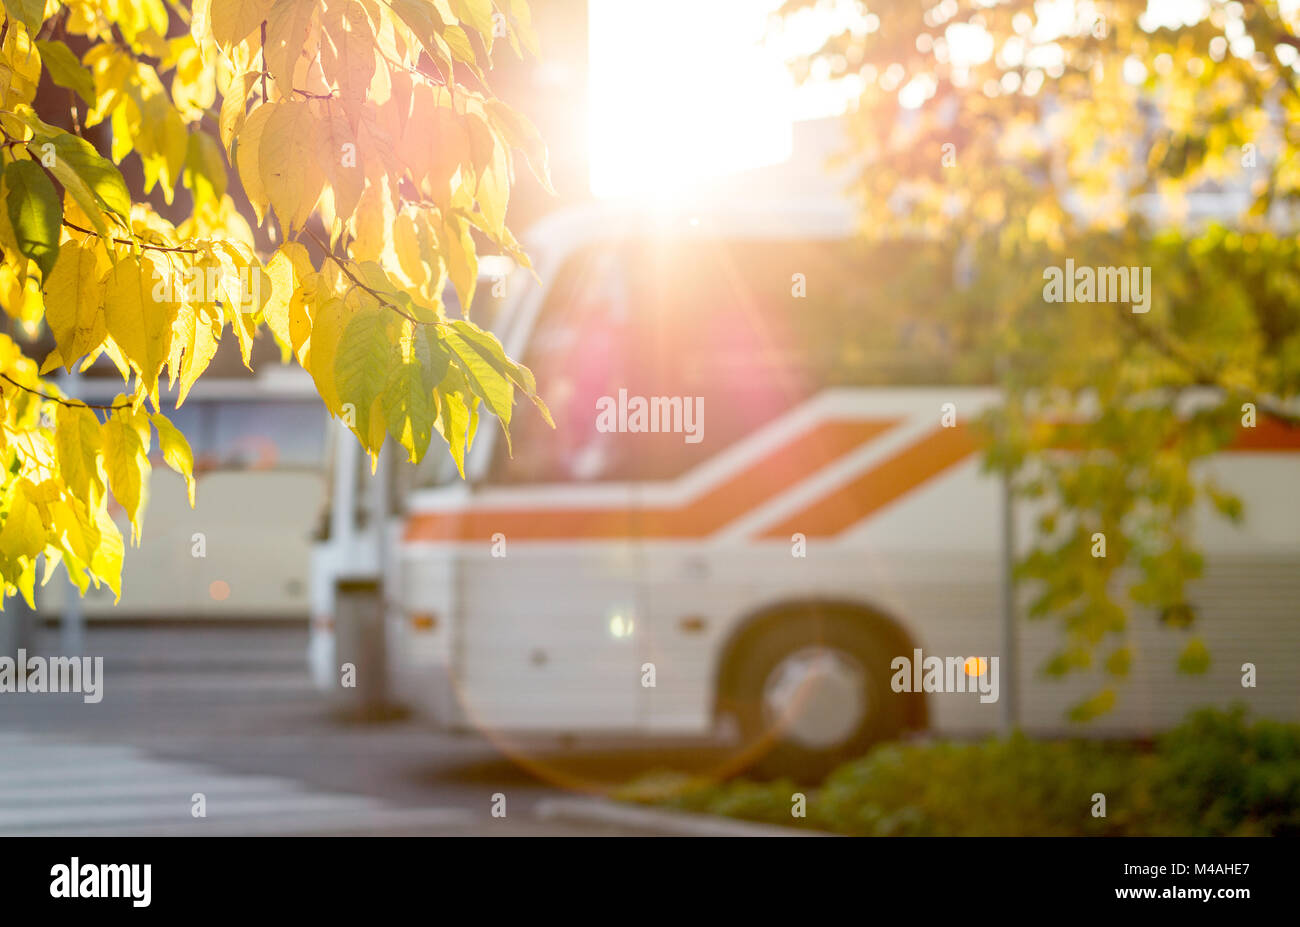 Bus at station framed by autumn colored leaves from trees. Sunny public transportation concept. Stock Photo